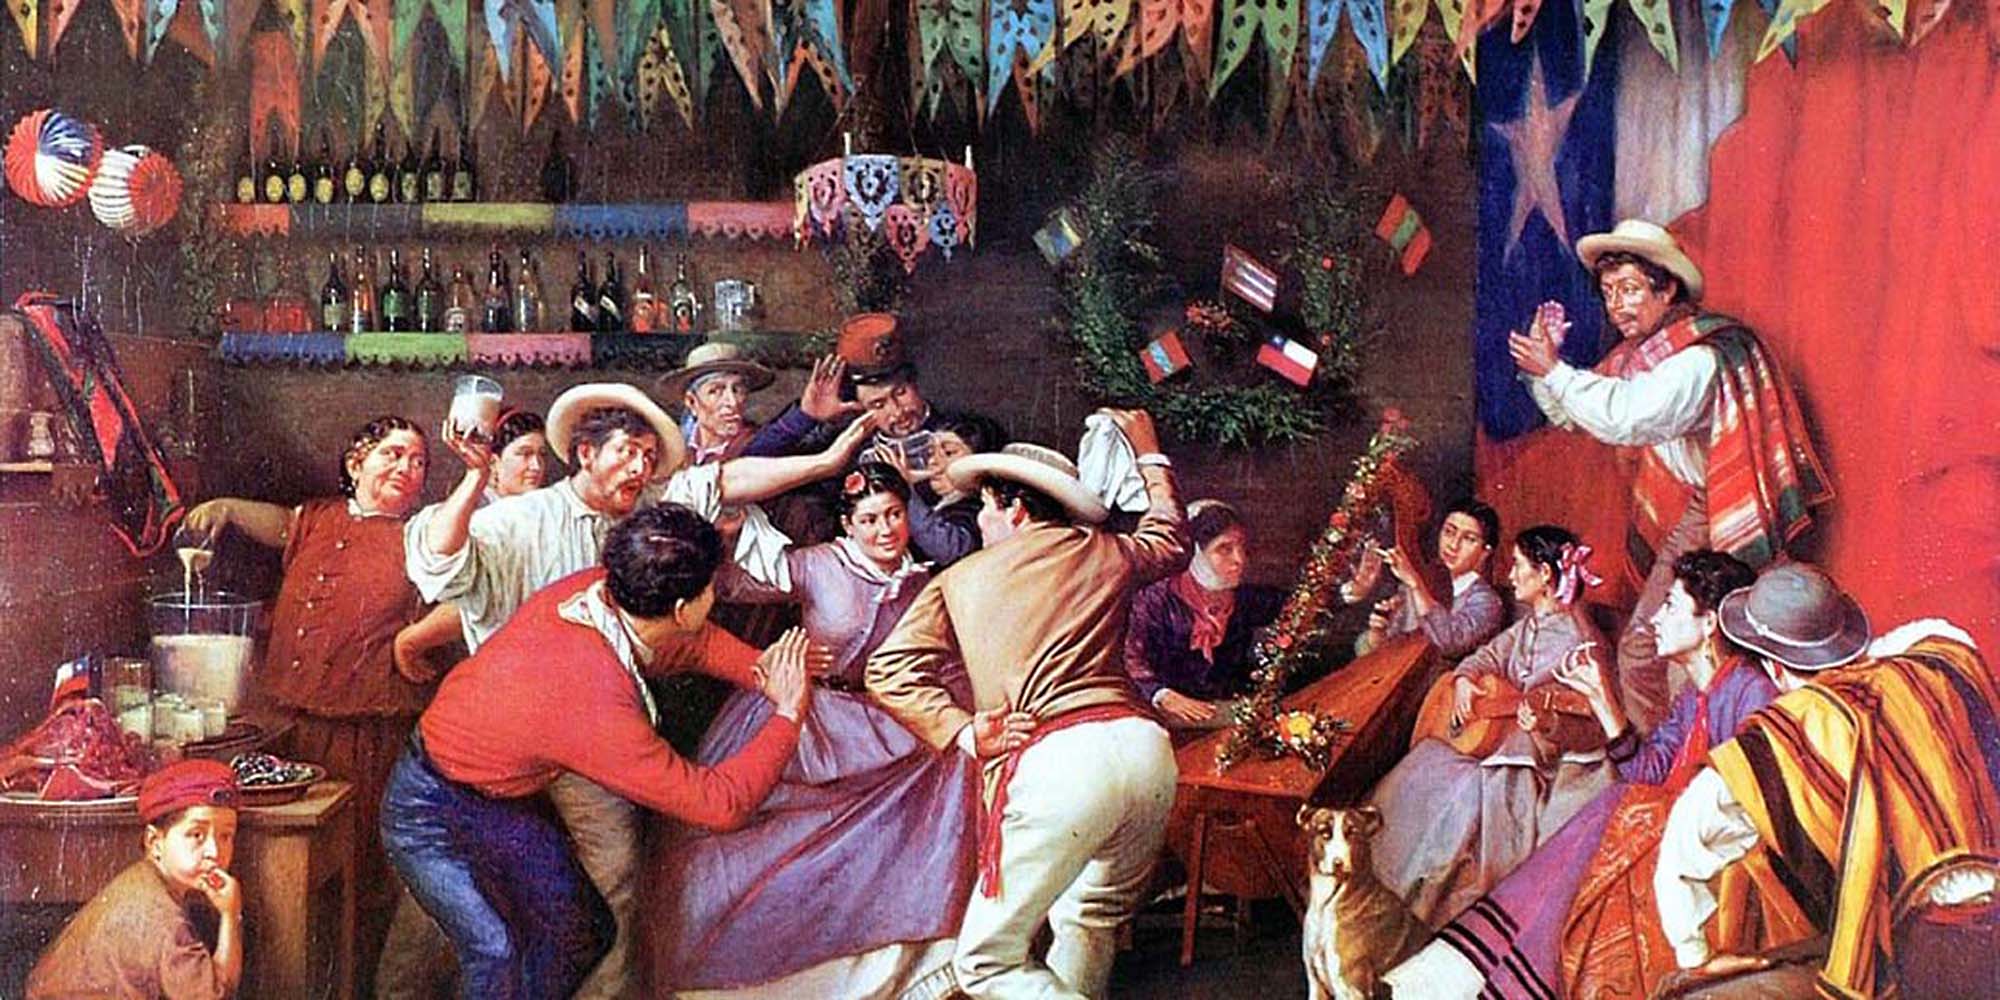 Fiestas Patrias, a Chilean Independence Day Celebration